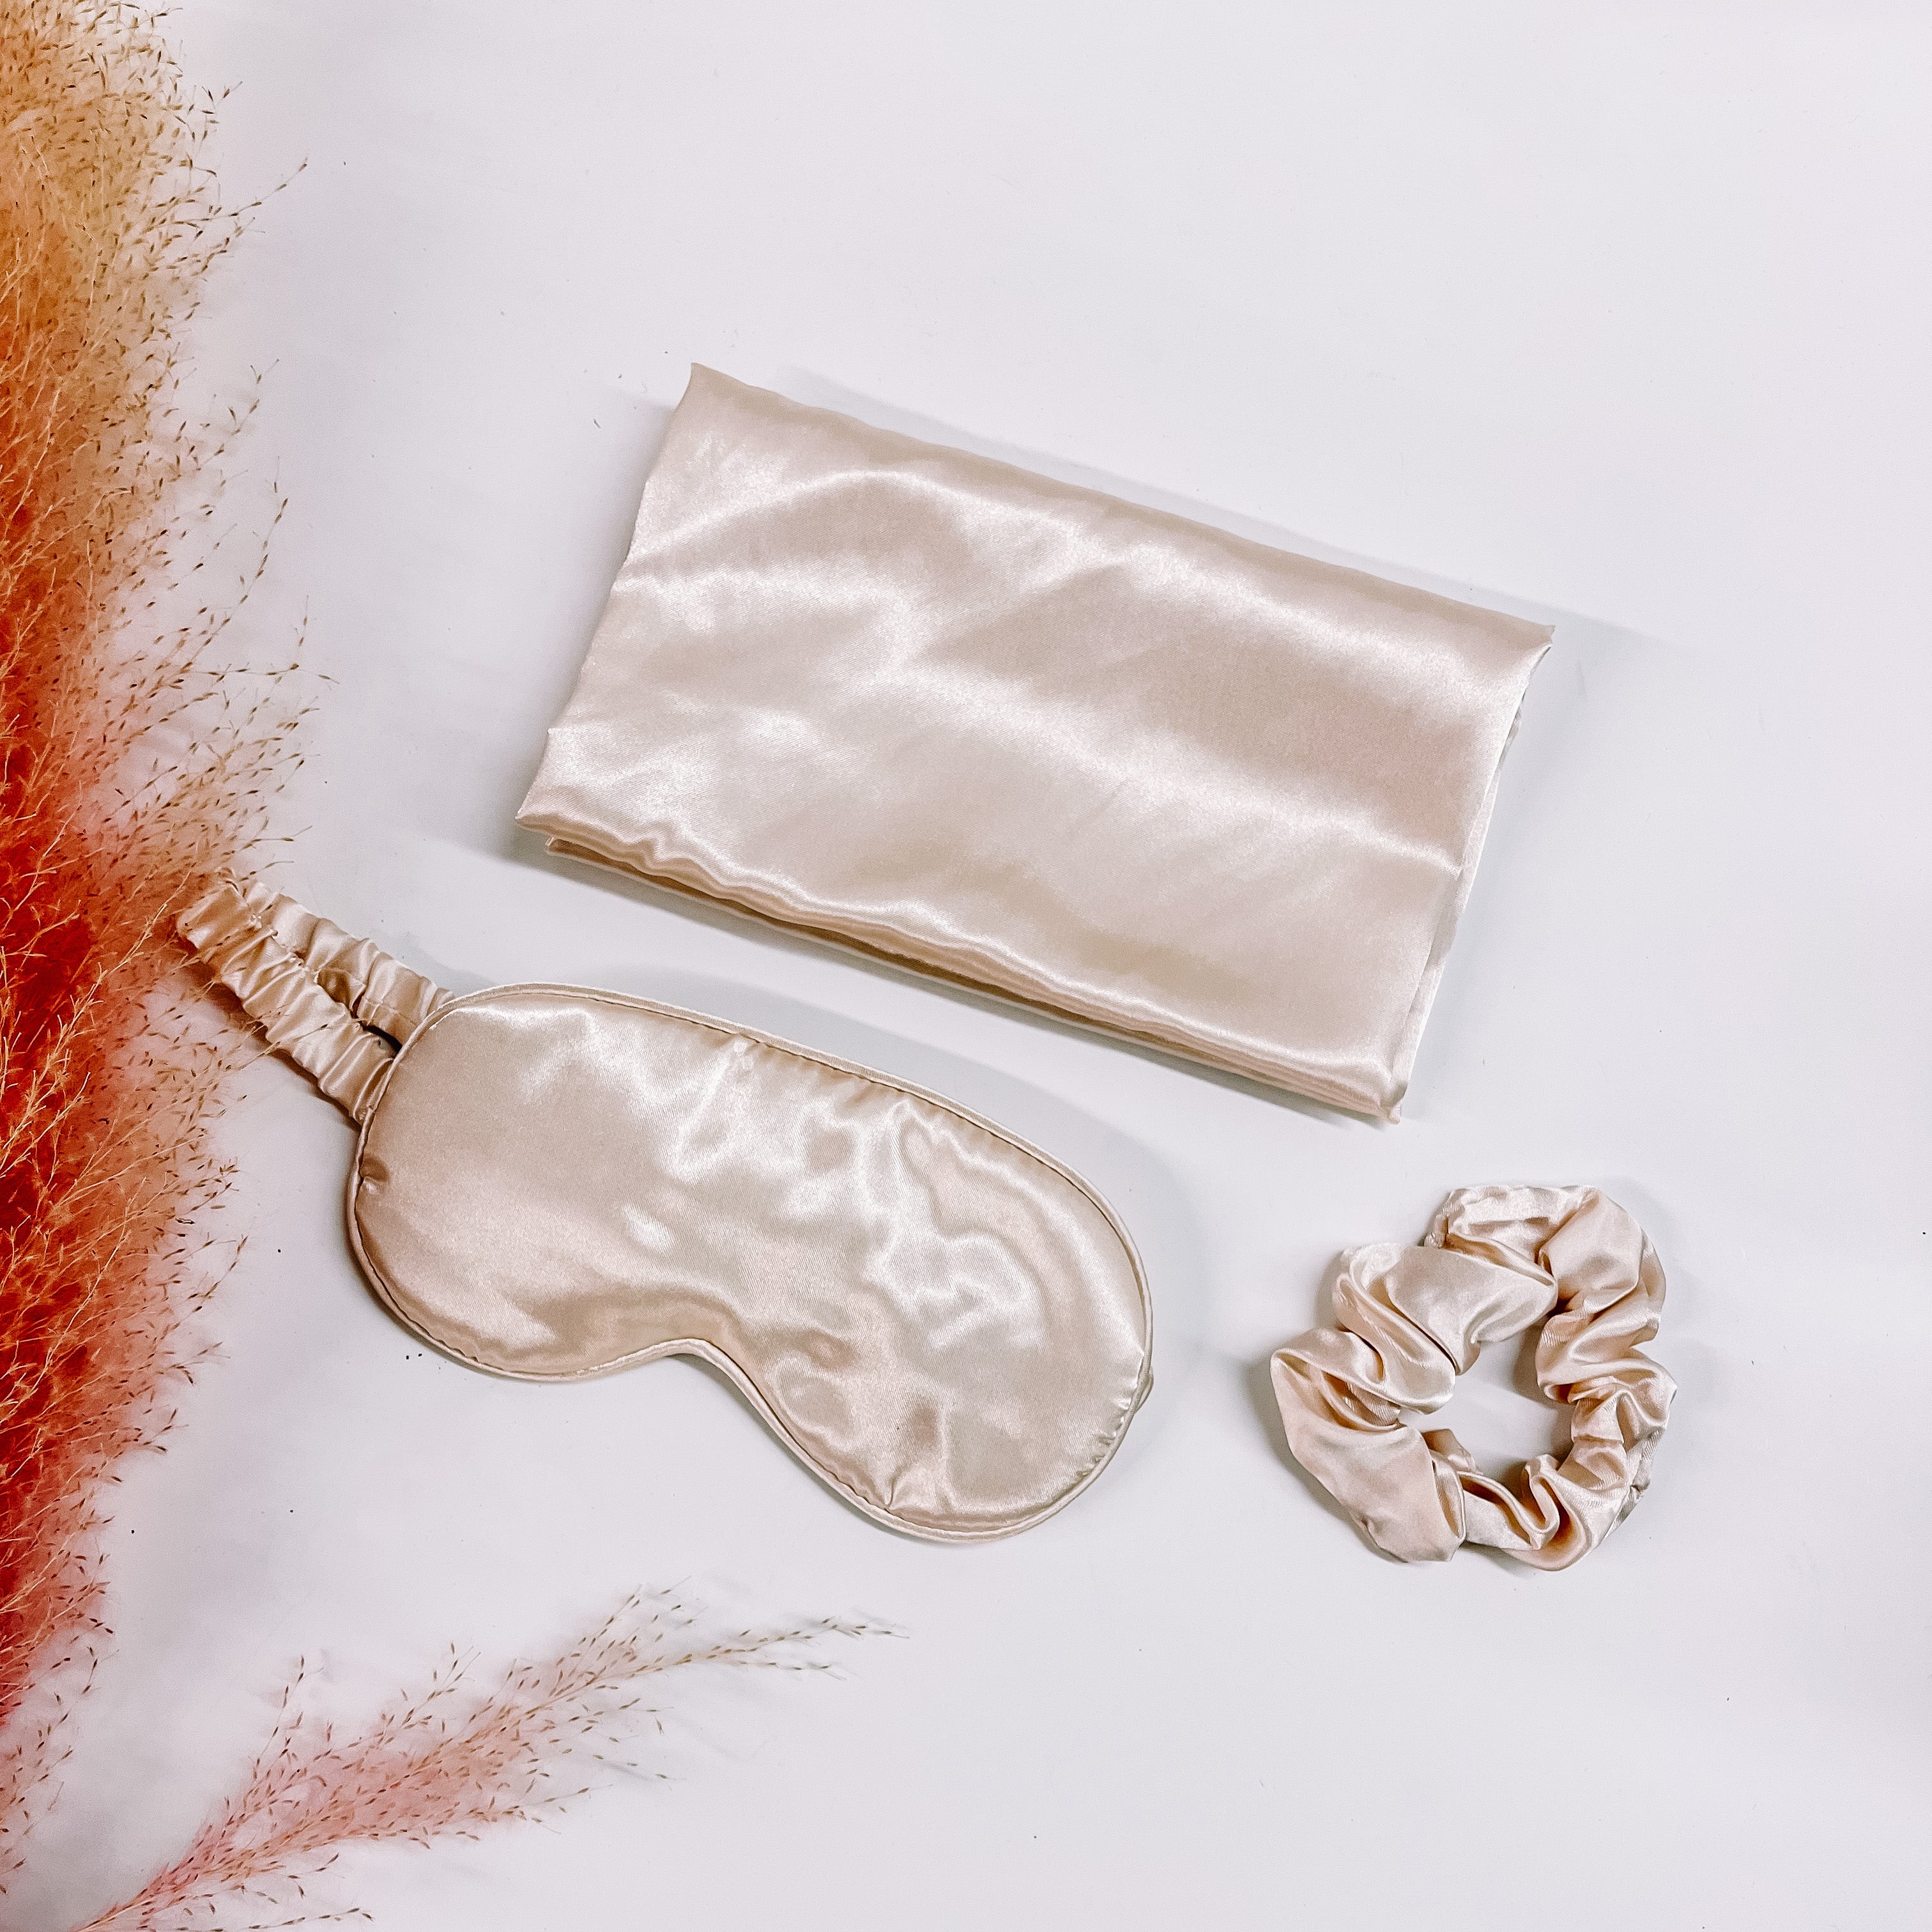 This is a satin pillow case, eye mask, and srunchie in invory. These items are taken on a white background with a pink plant in the side as decor.